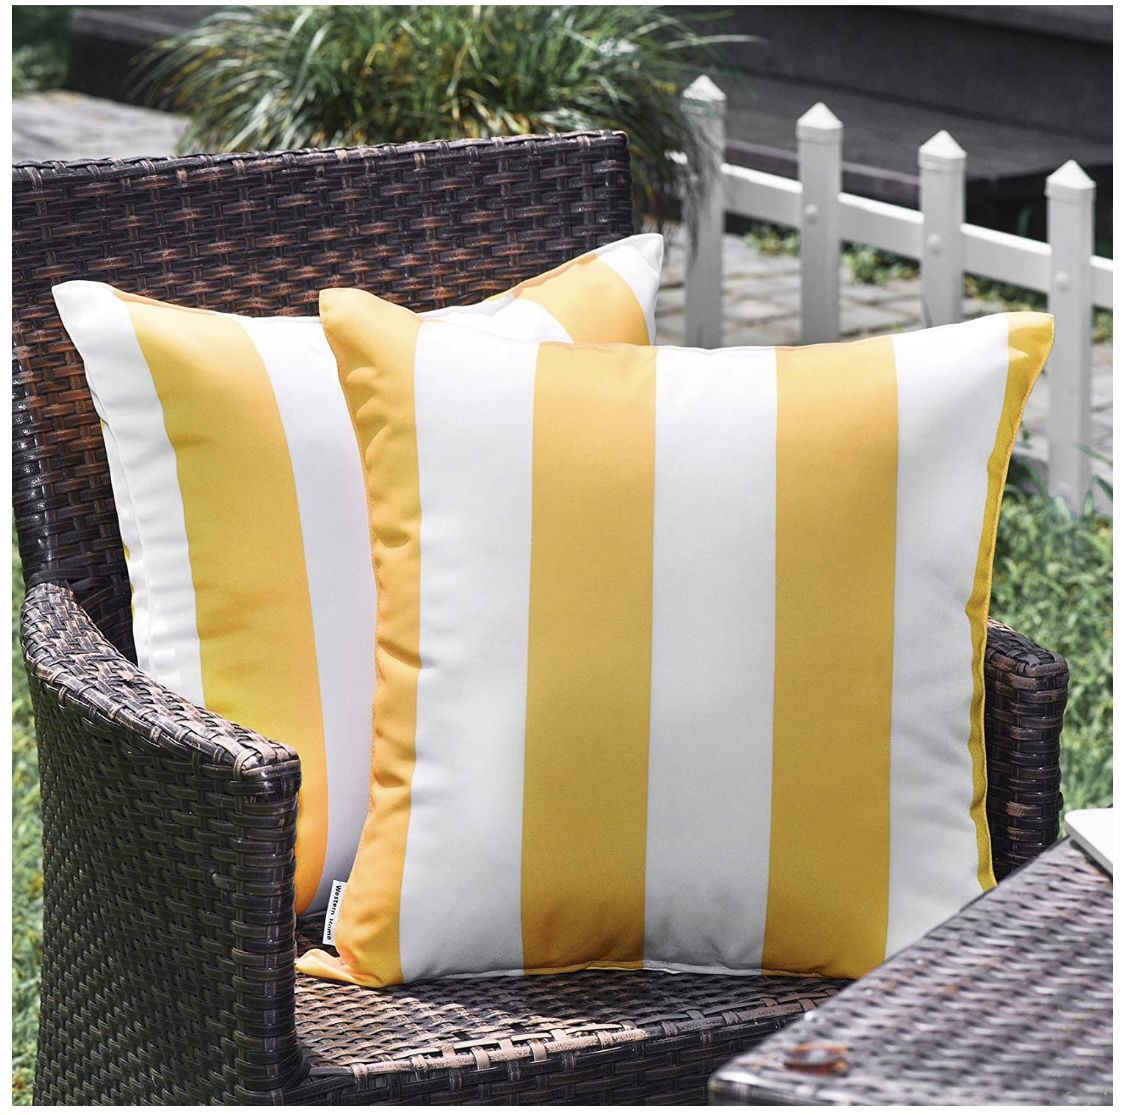 WESTERN HOME WH Outdoor Pillow Covers 18x18 Waterproof, Stripe Square Pillowcases Patio Throw Pillow Covers Cushions for Couch Bench Tent Garden - Pa